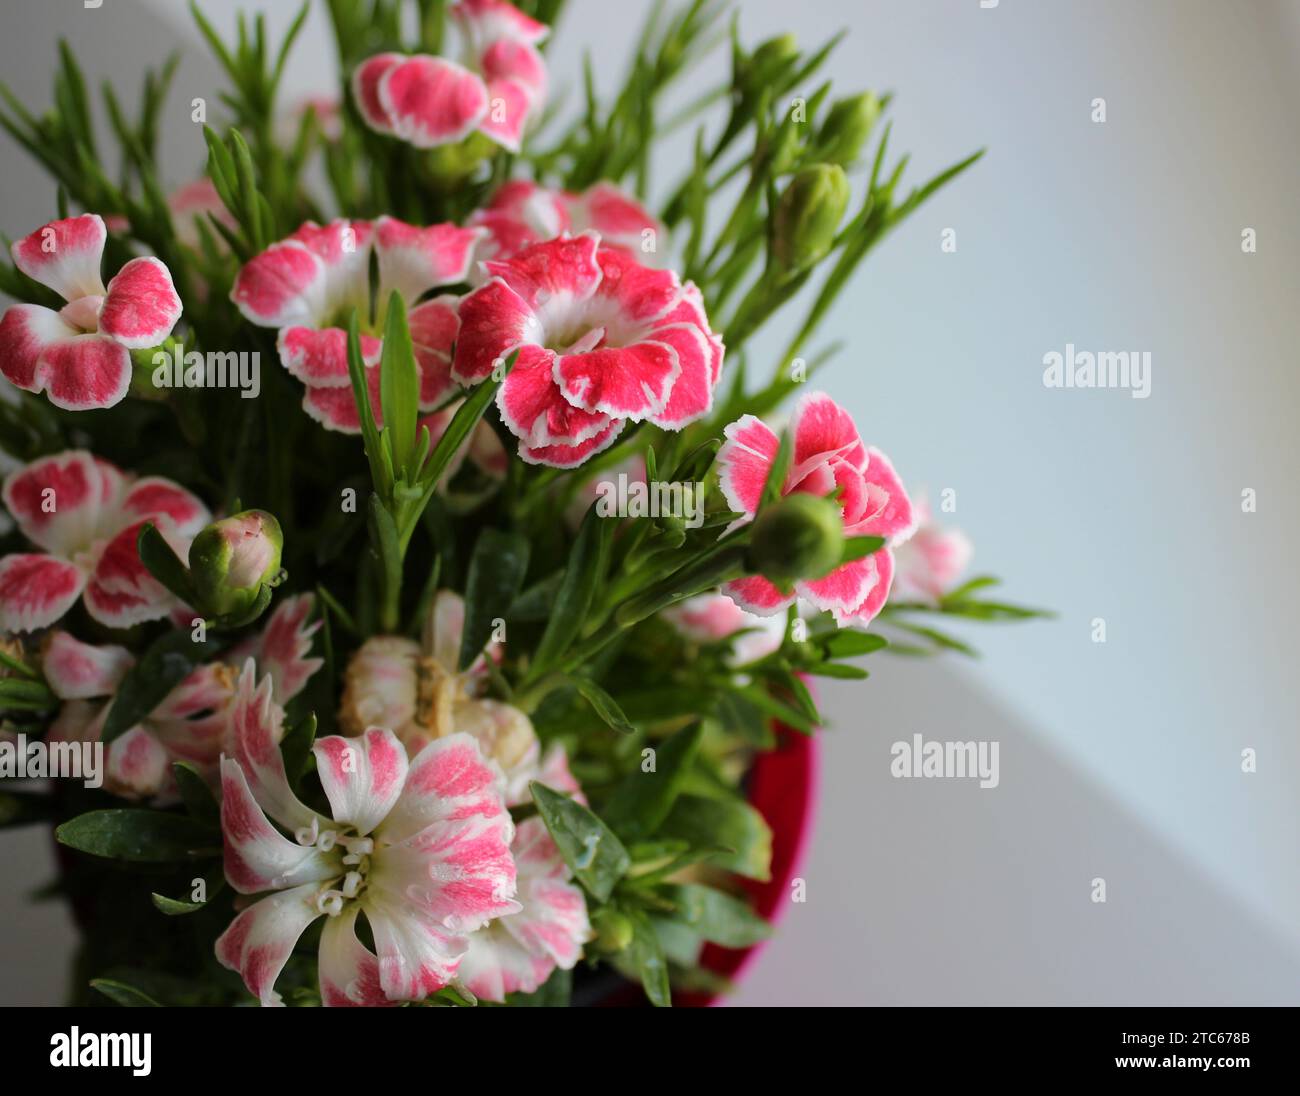 Flowering Small Carnation Bunch In A Flower Pot On White Background Top View Stock Photo